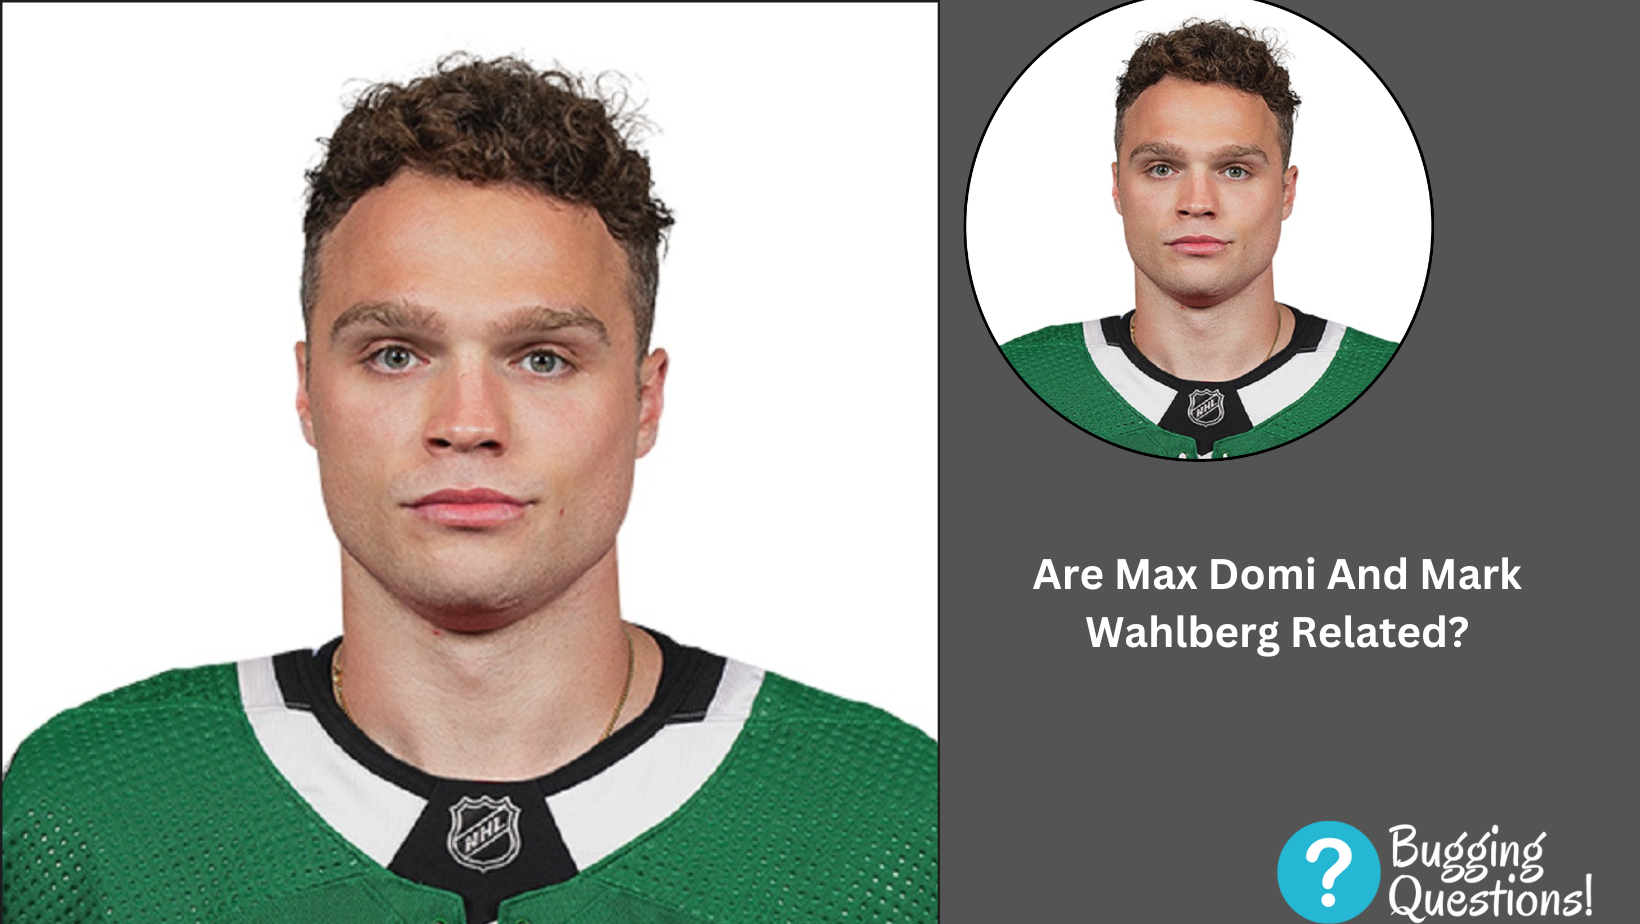 Are Max Domi And Mark Wahlberg Related?